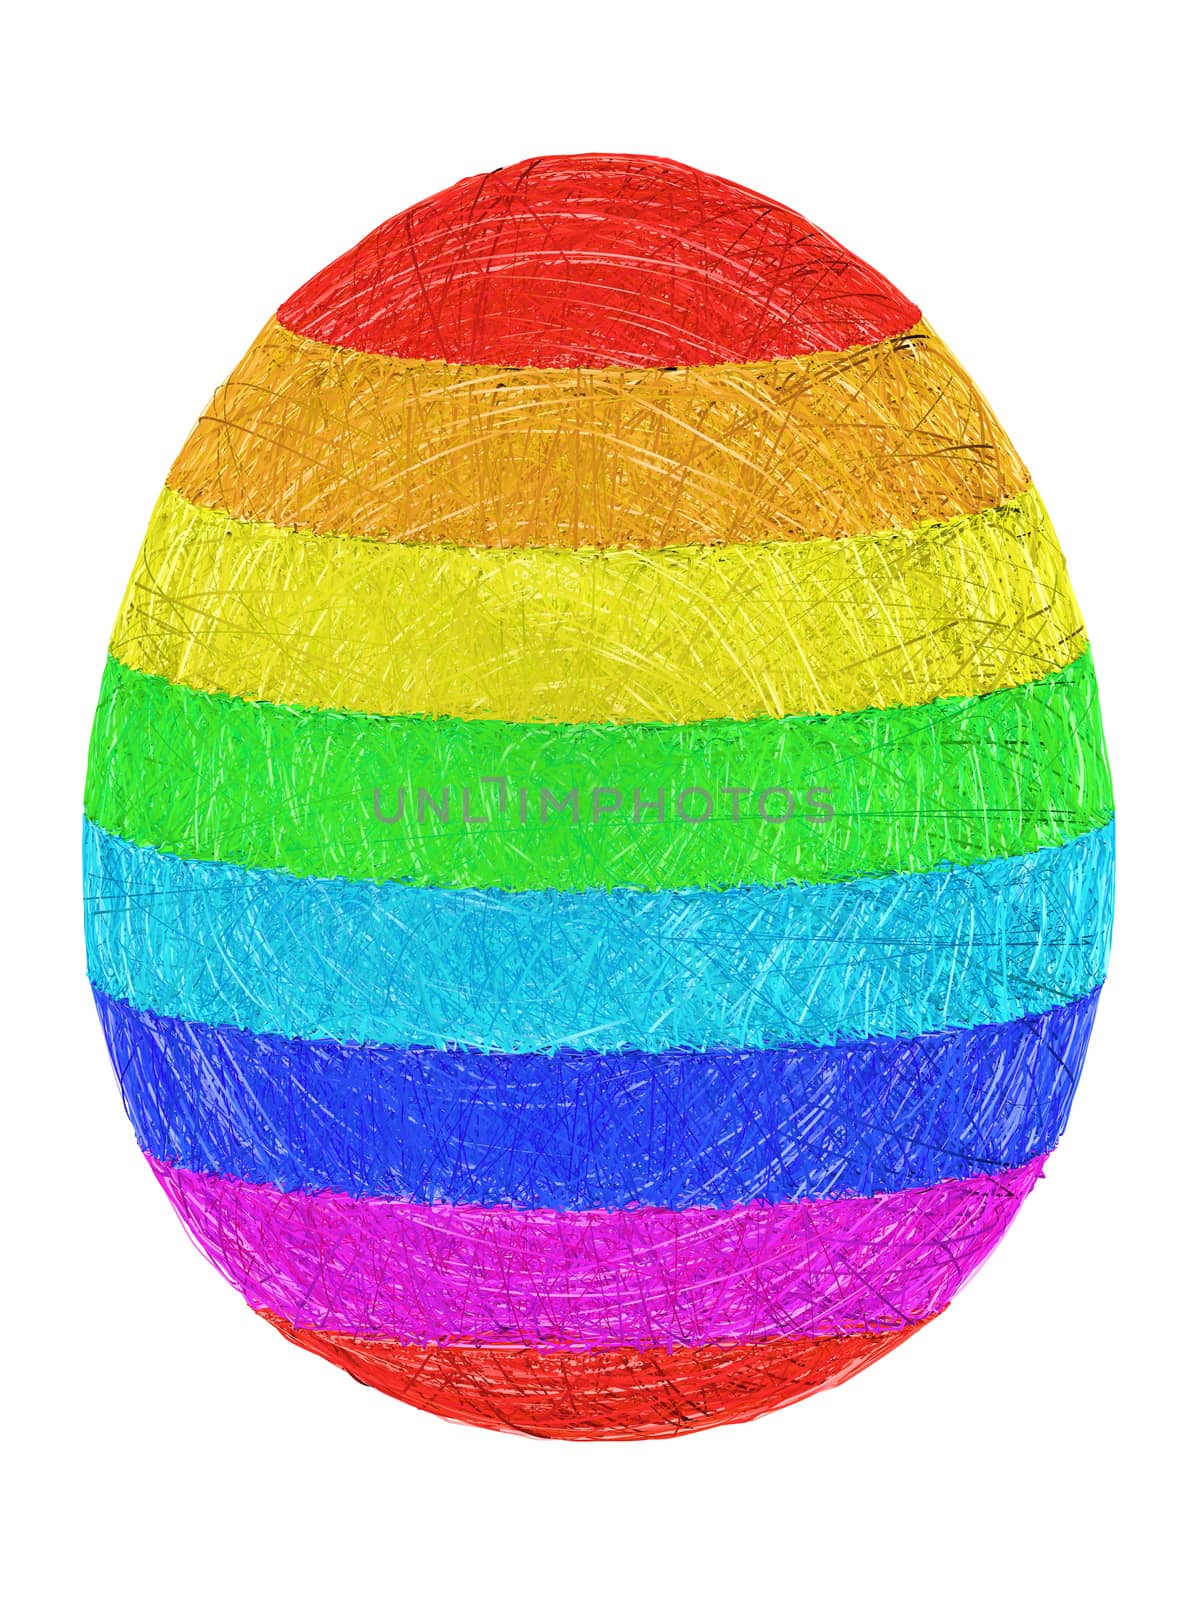 Easter egg composed of layers of colorful lines on white by oneo